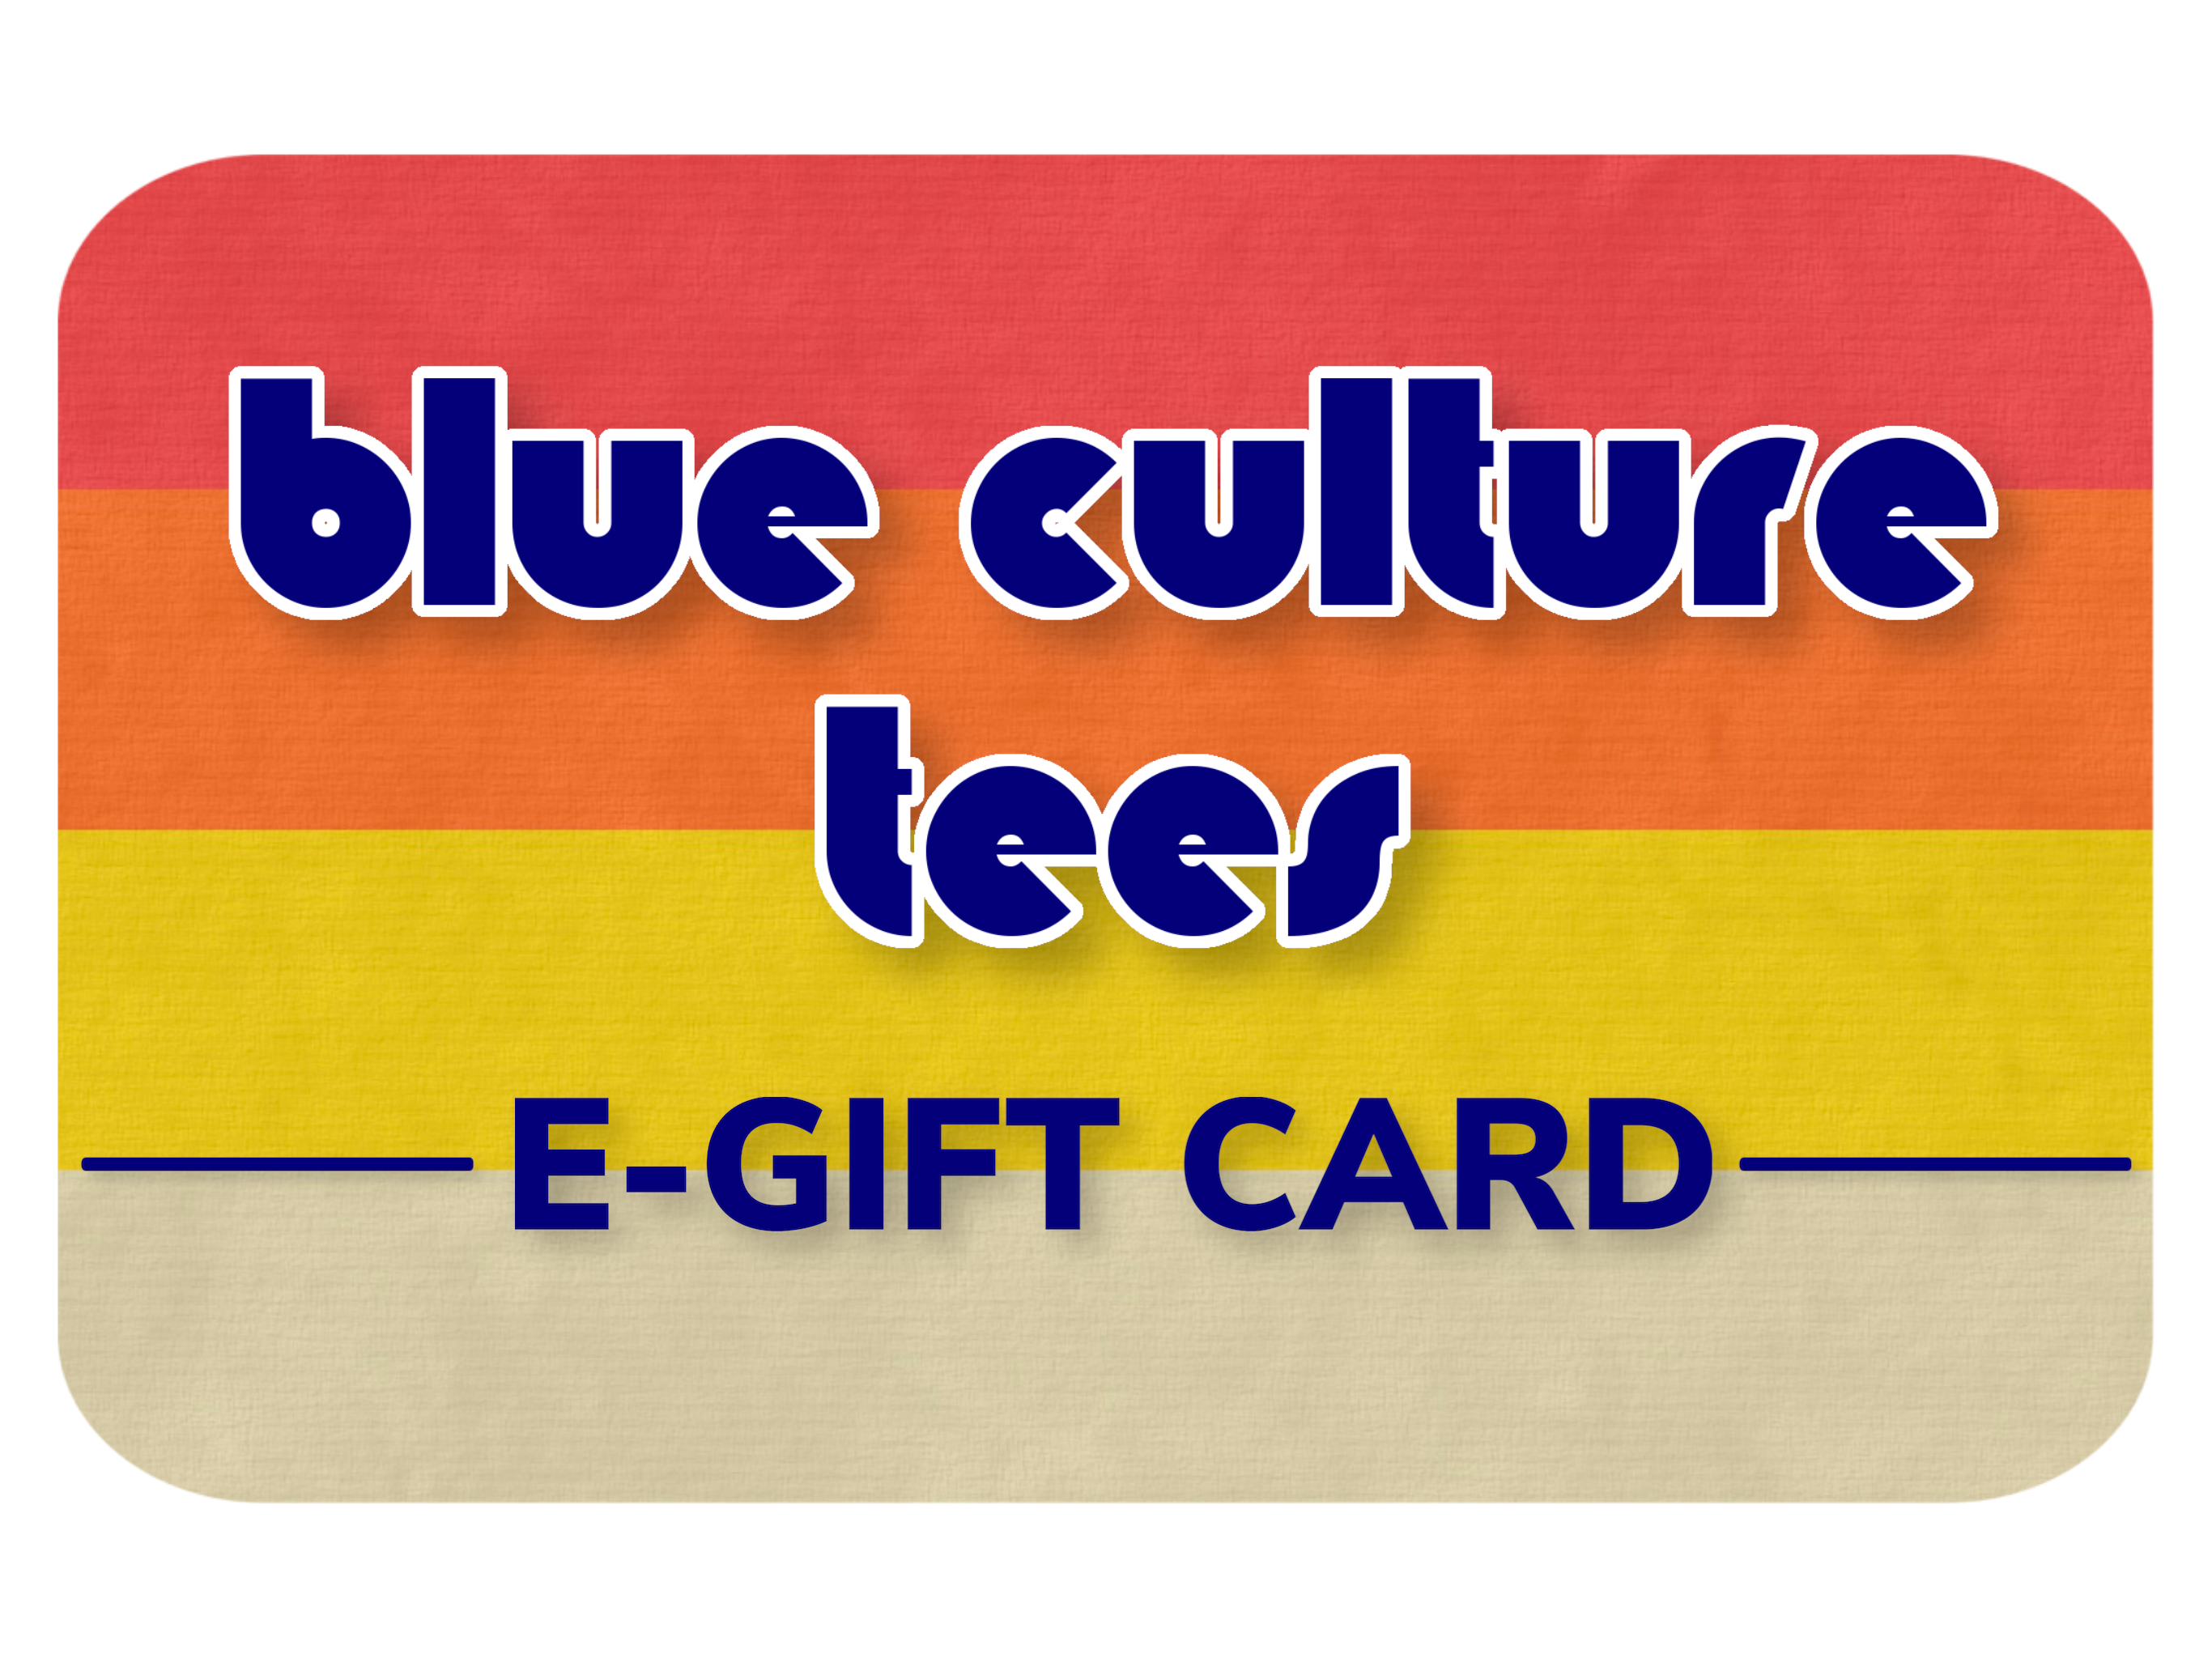 Blue Culture Tees Gift Card